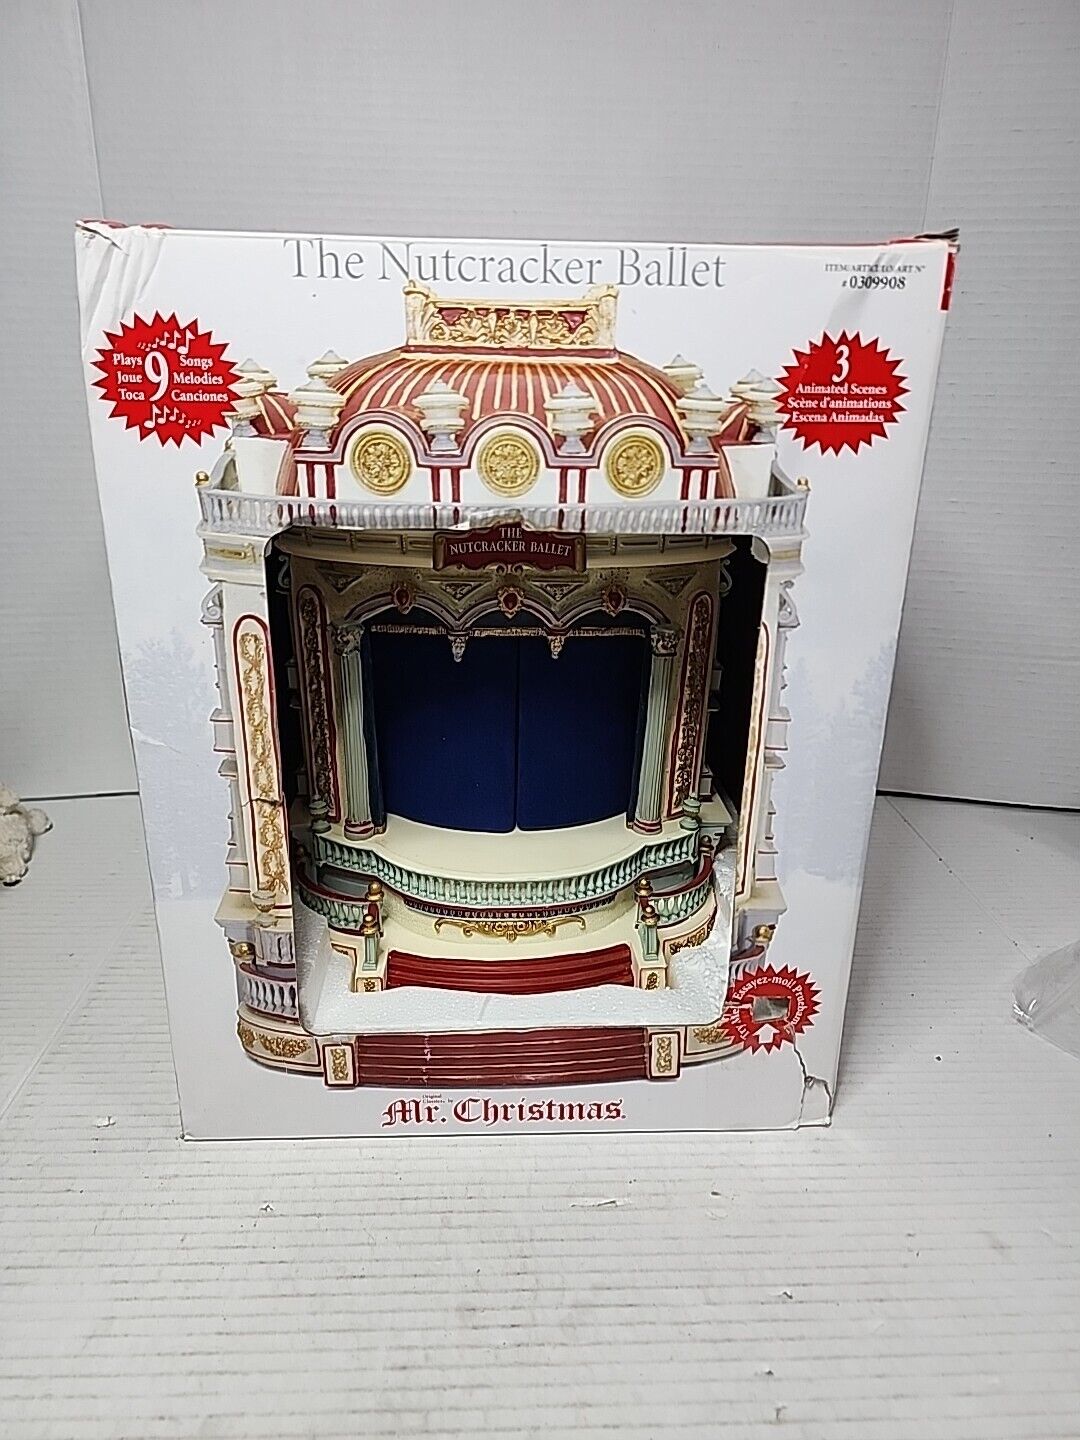 Mr Christmas The Nutcracker Ballet Animated Musical Theater Great Working Cond.